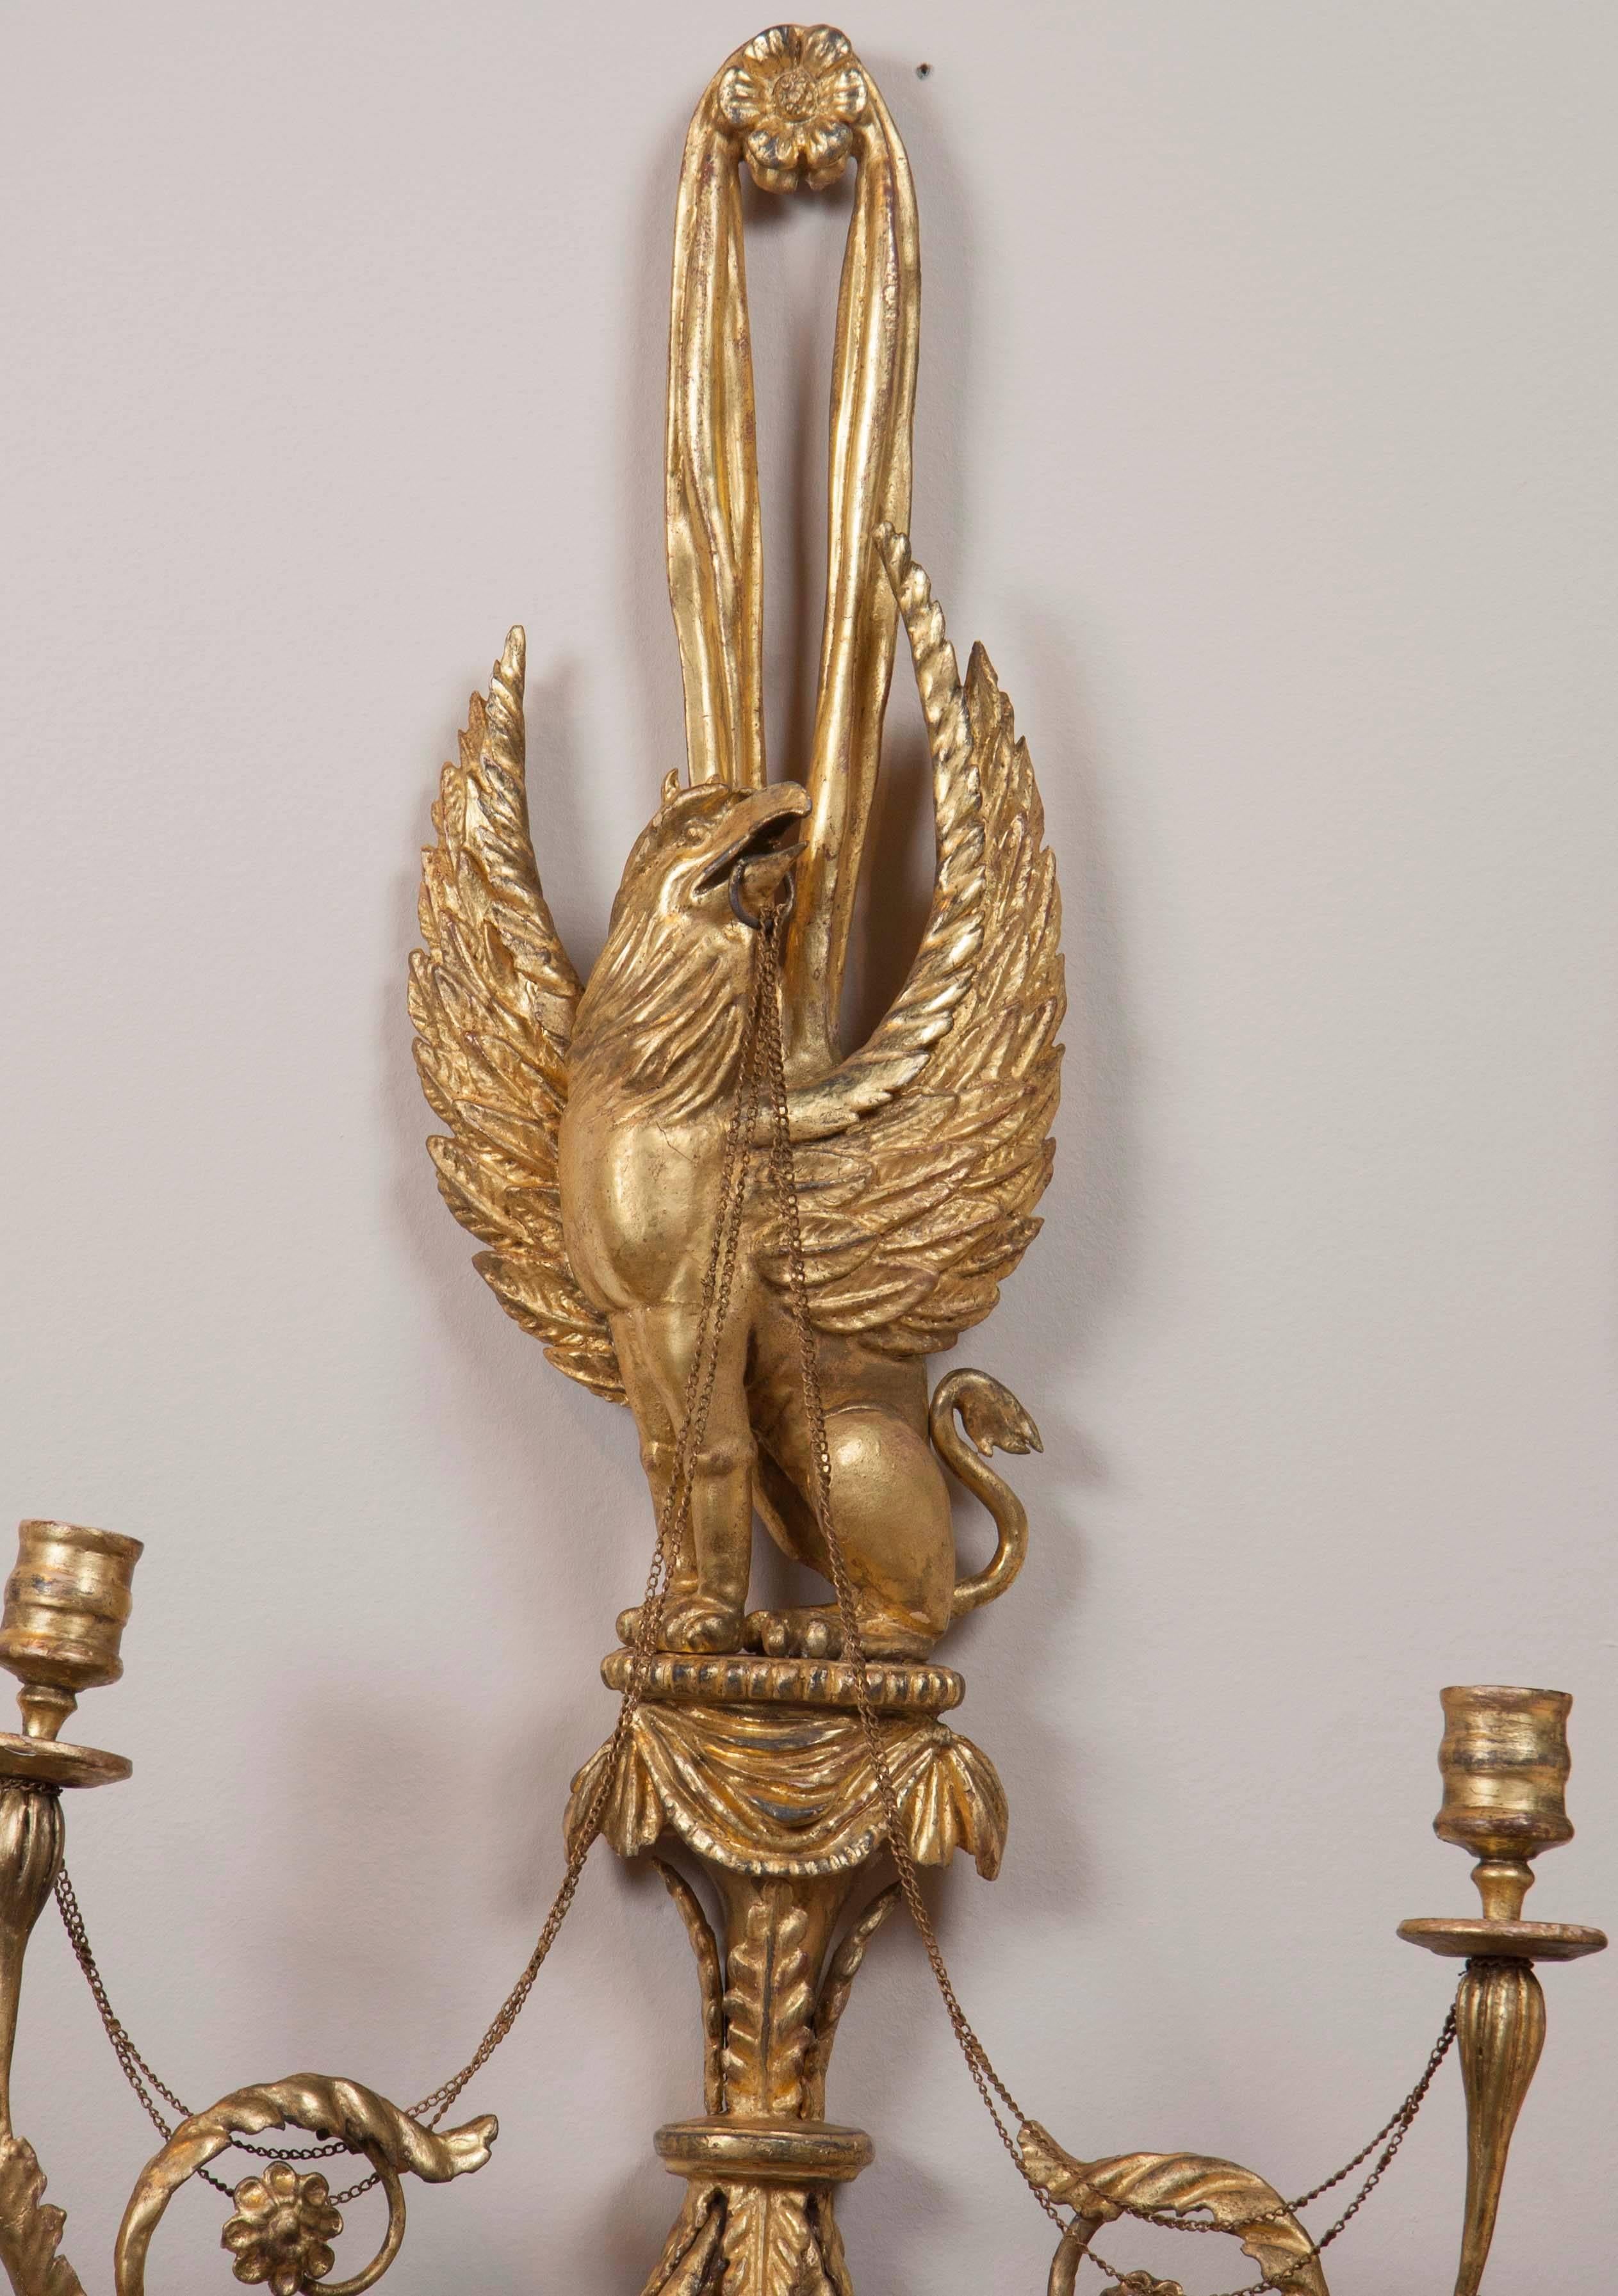 Each features a gryphon with a ring in its mouth and chains connecting to two taper candle holders, with details of leaves and flowers. Has been re-gilded. Carved wood.